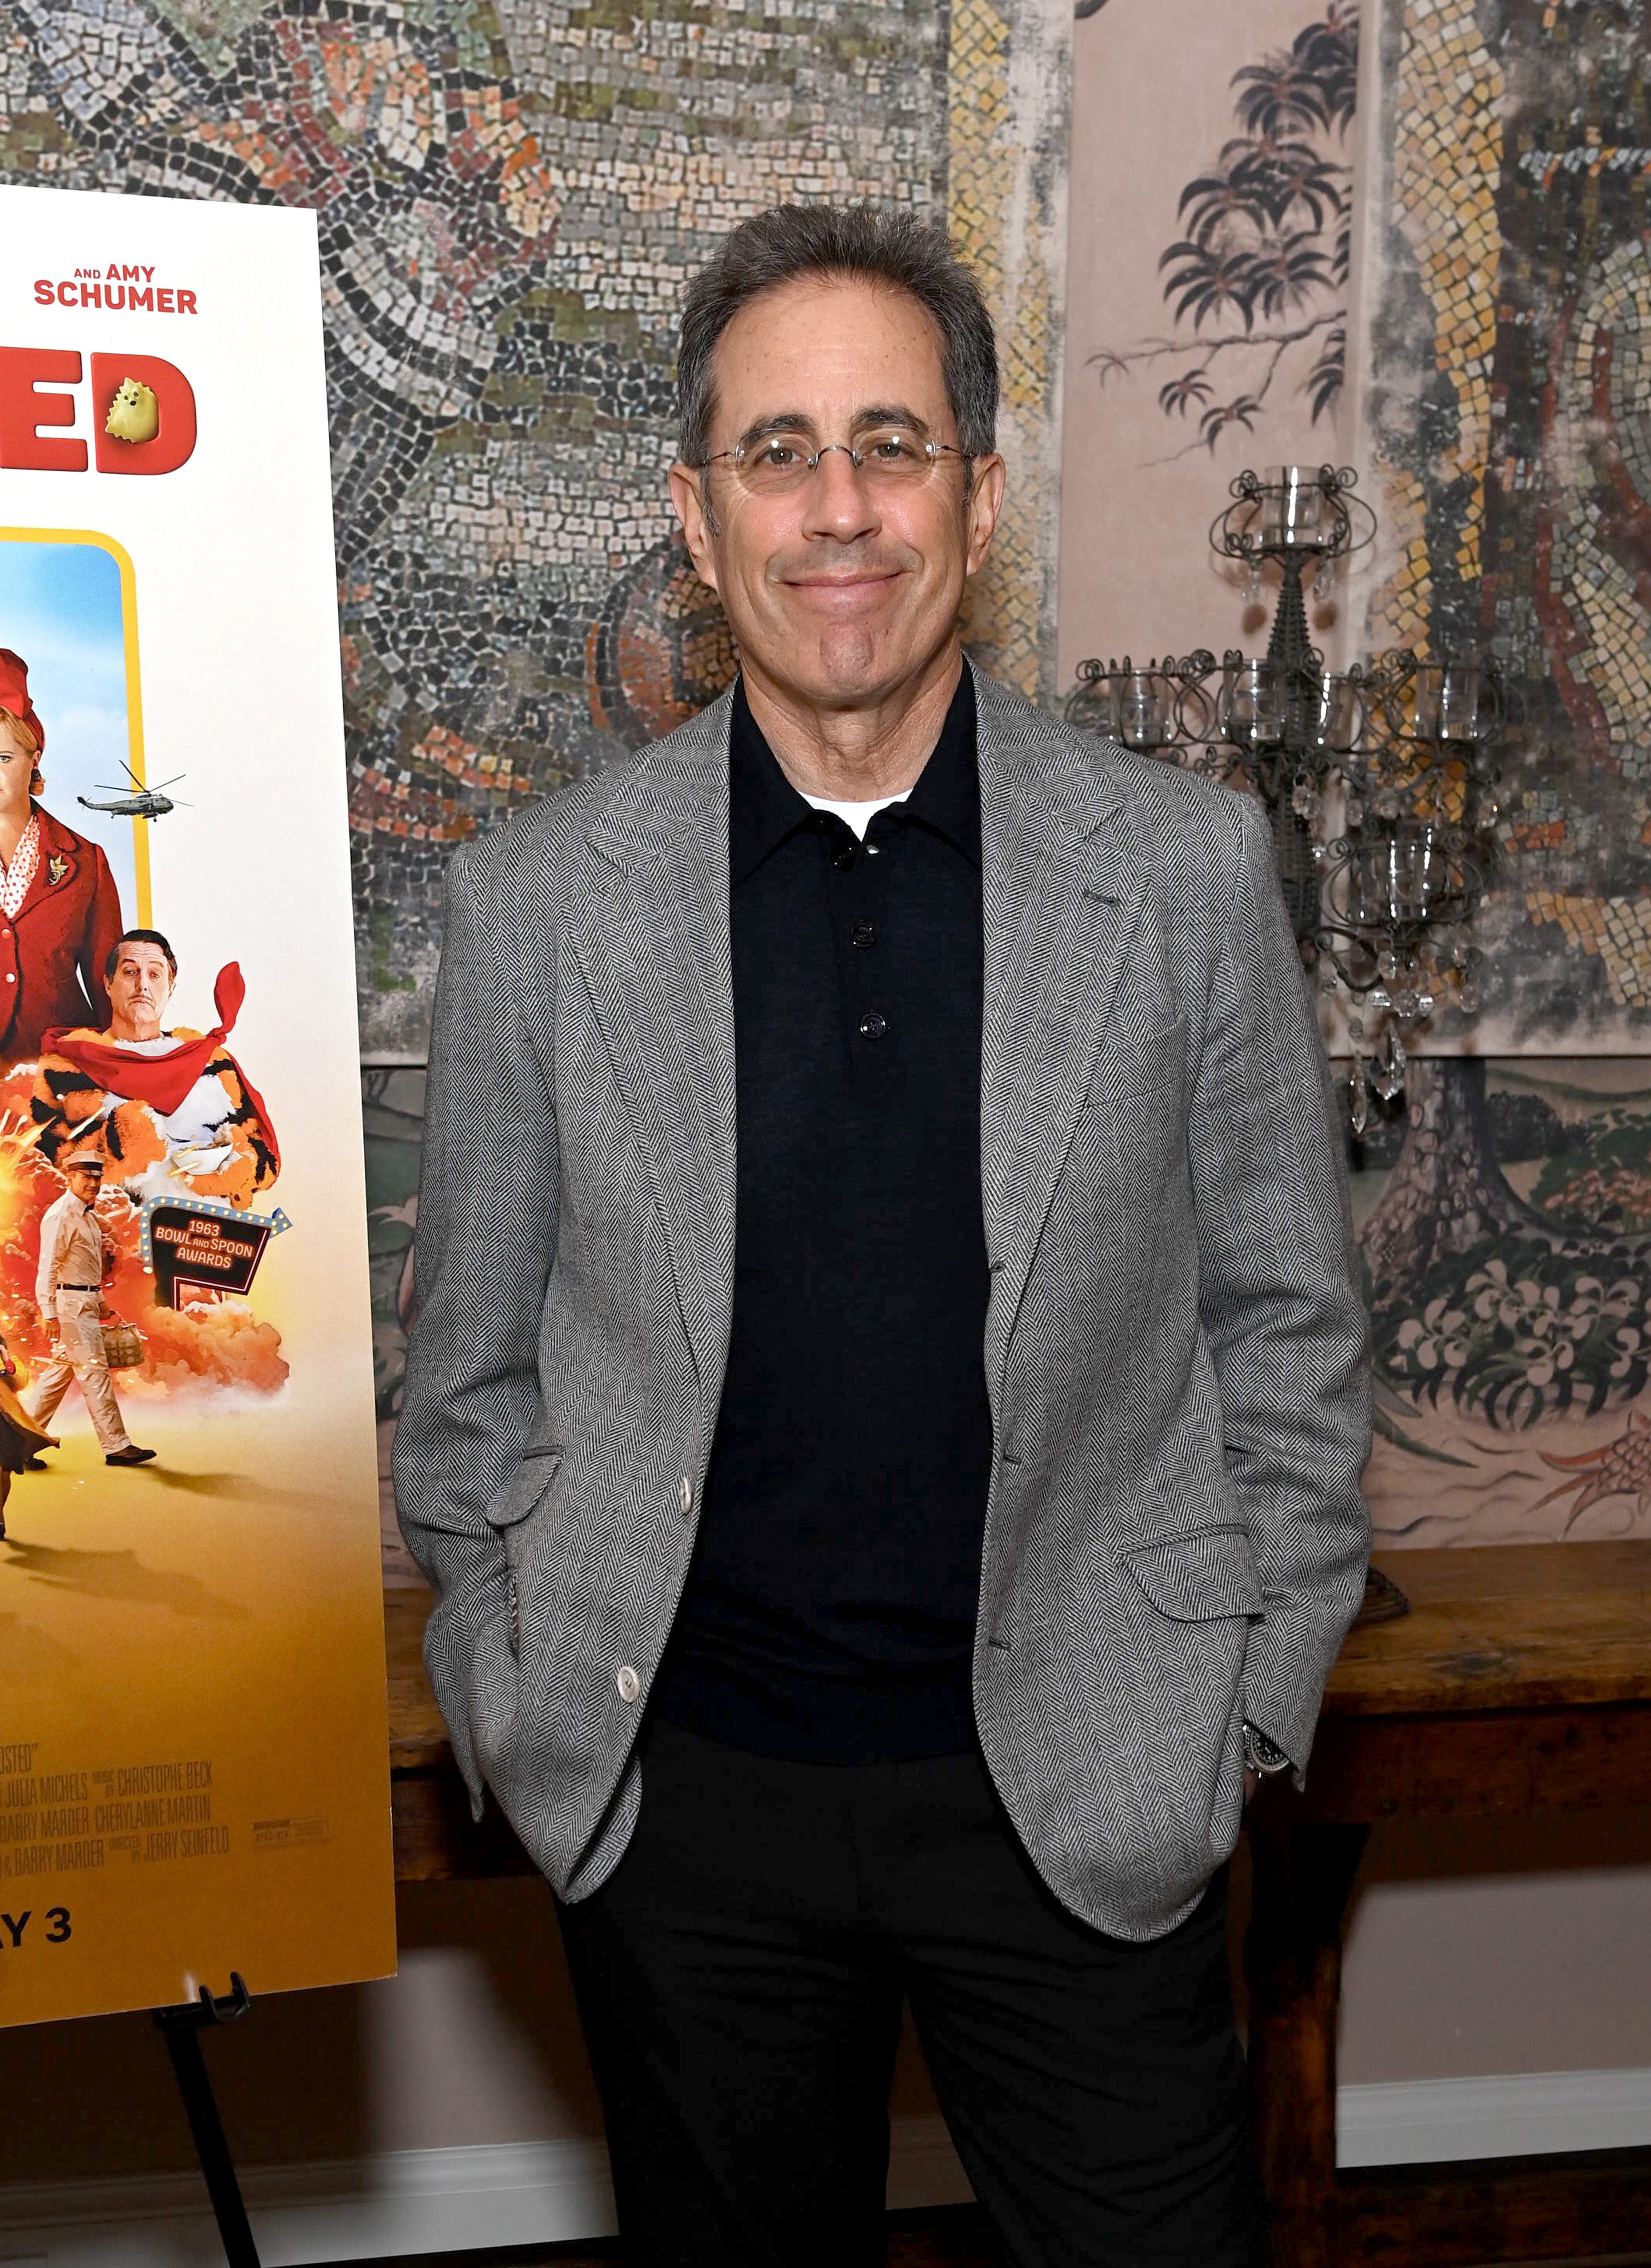 Students walk out of Jerry Seinfeld's Duke commencement speech after comedian's support of Israel